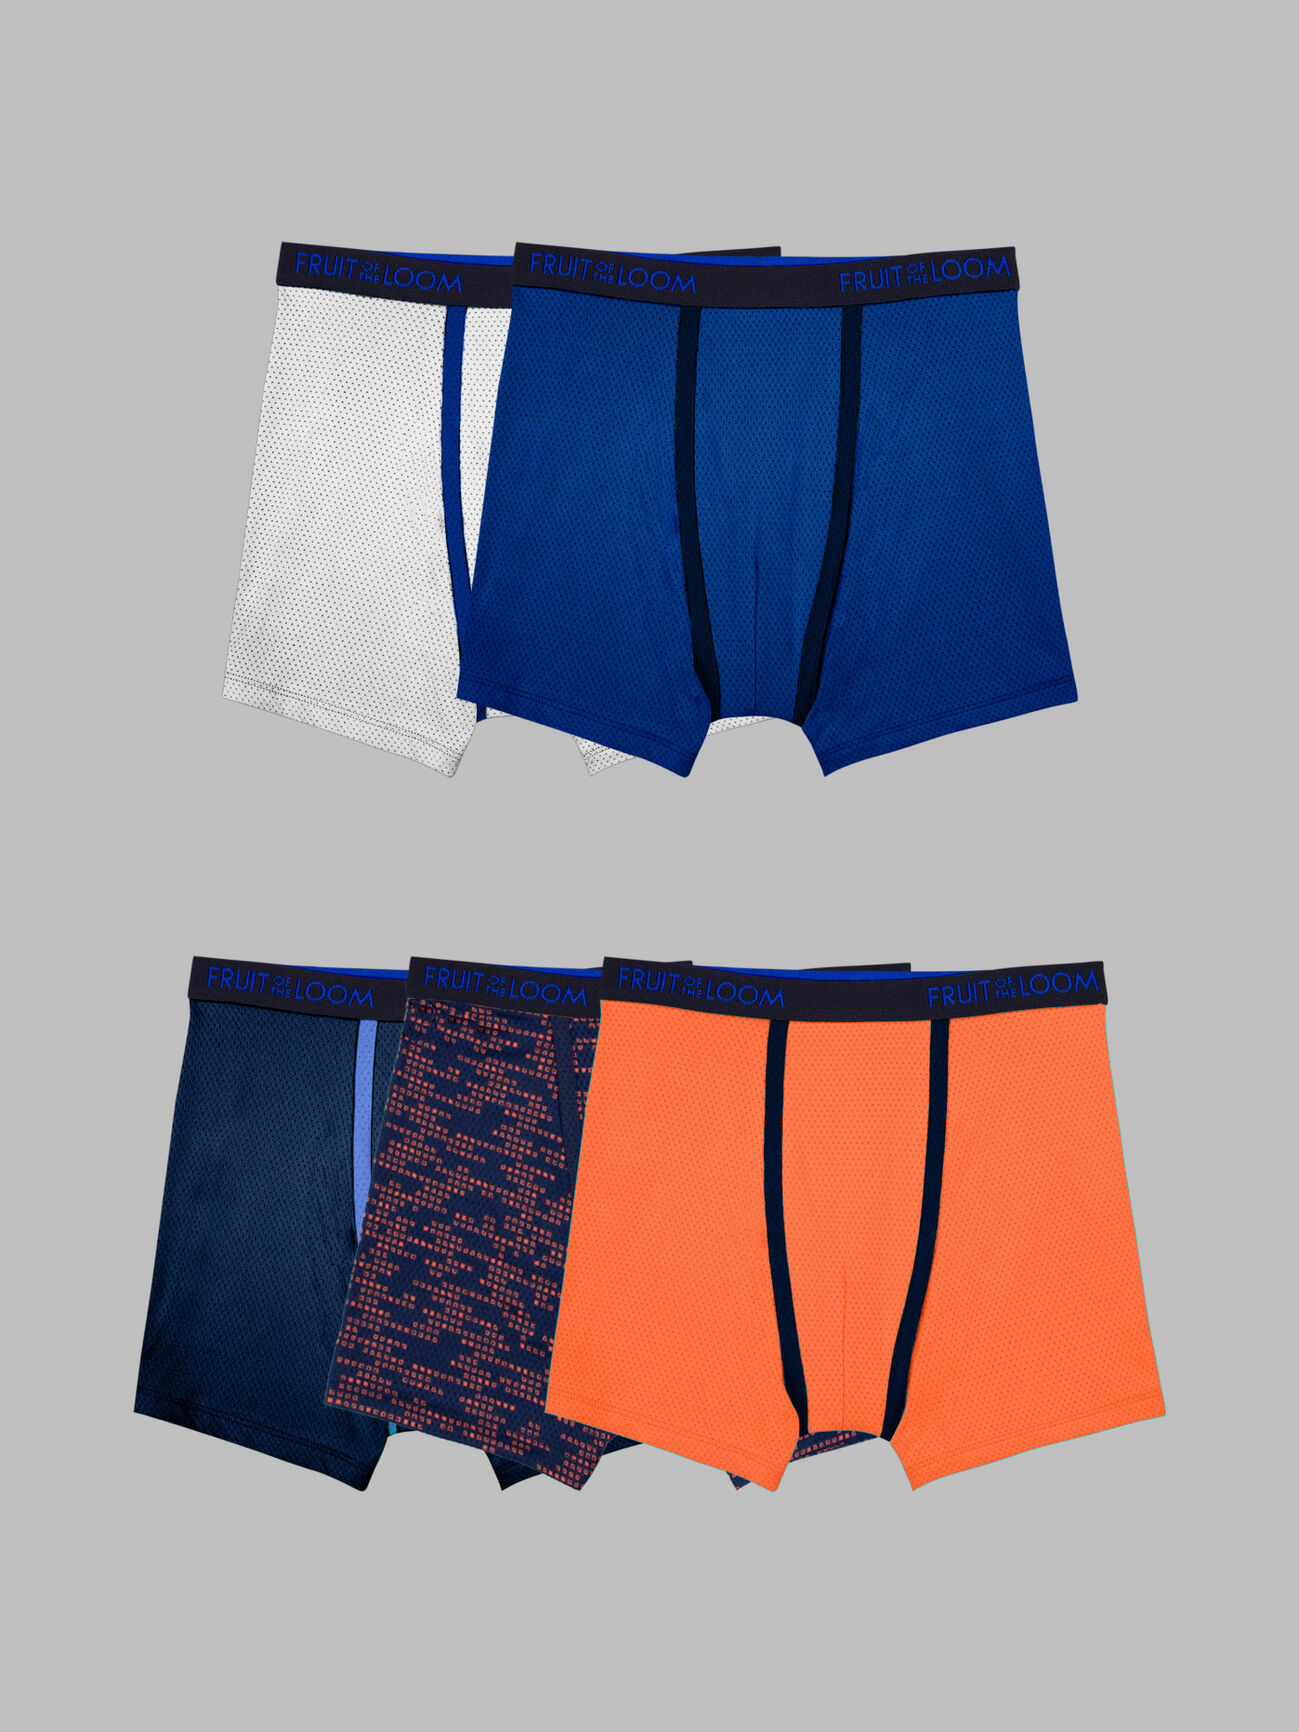 Boys' Breathable Micro-Mesh Boxer Briefs, Assorted Print and Solid